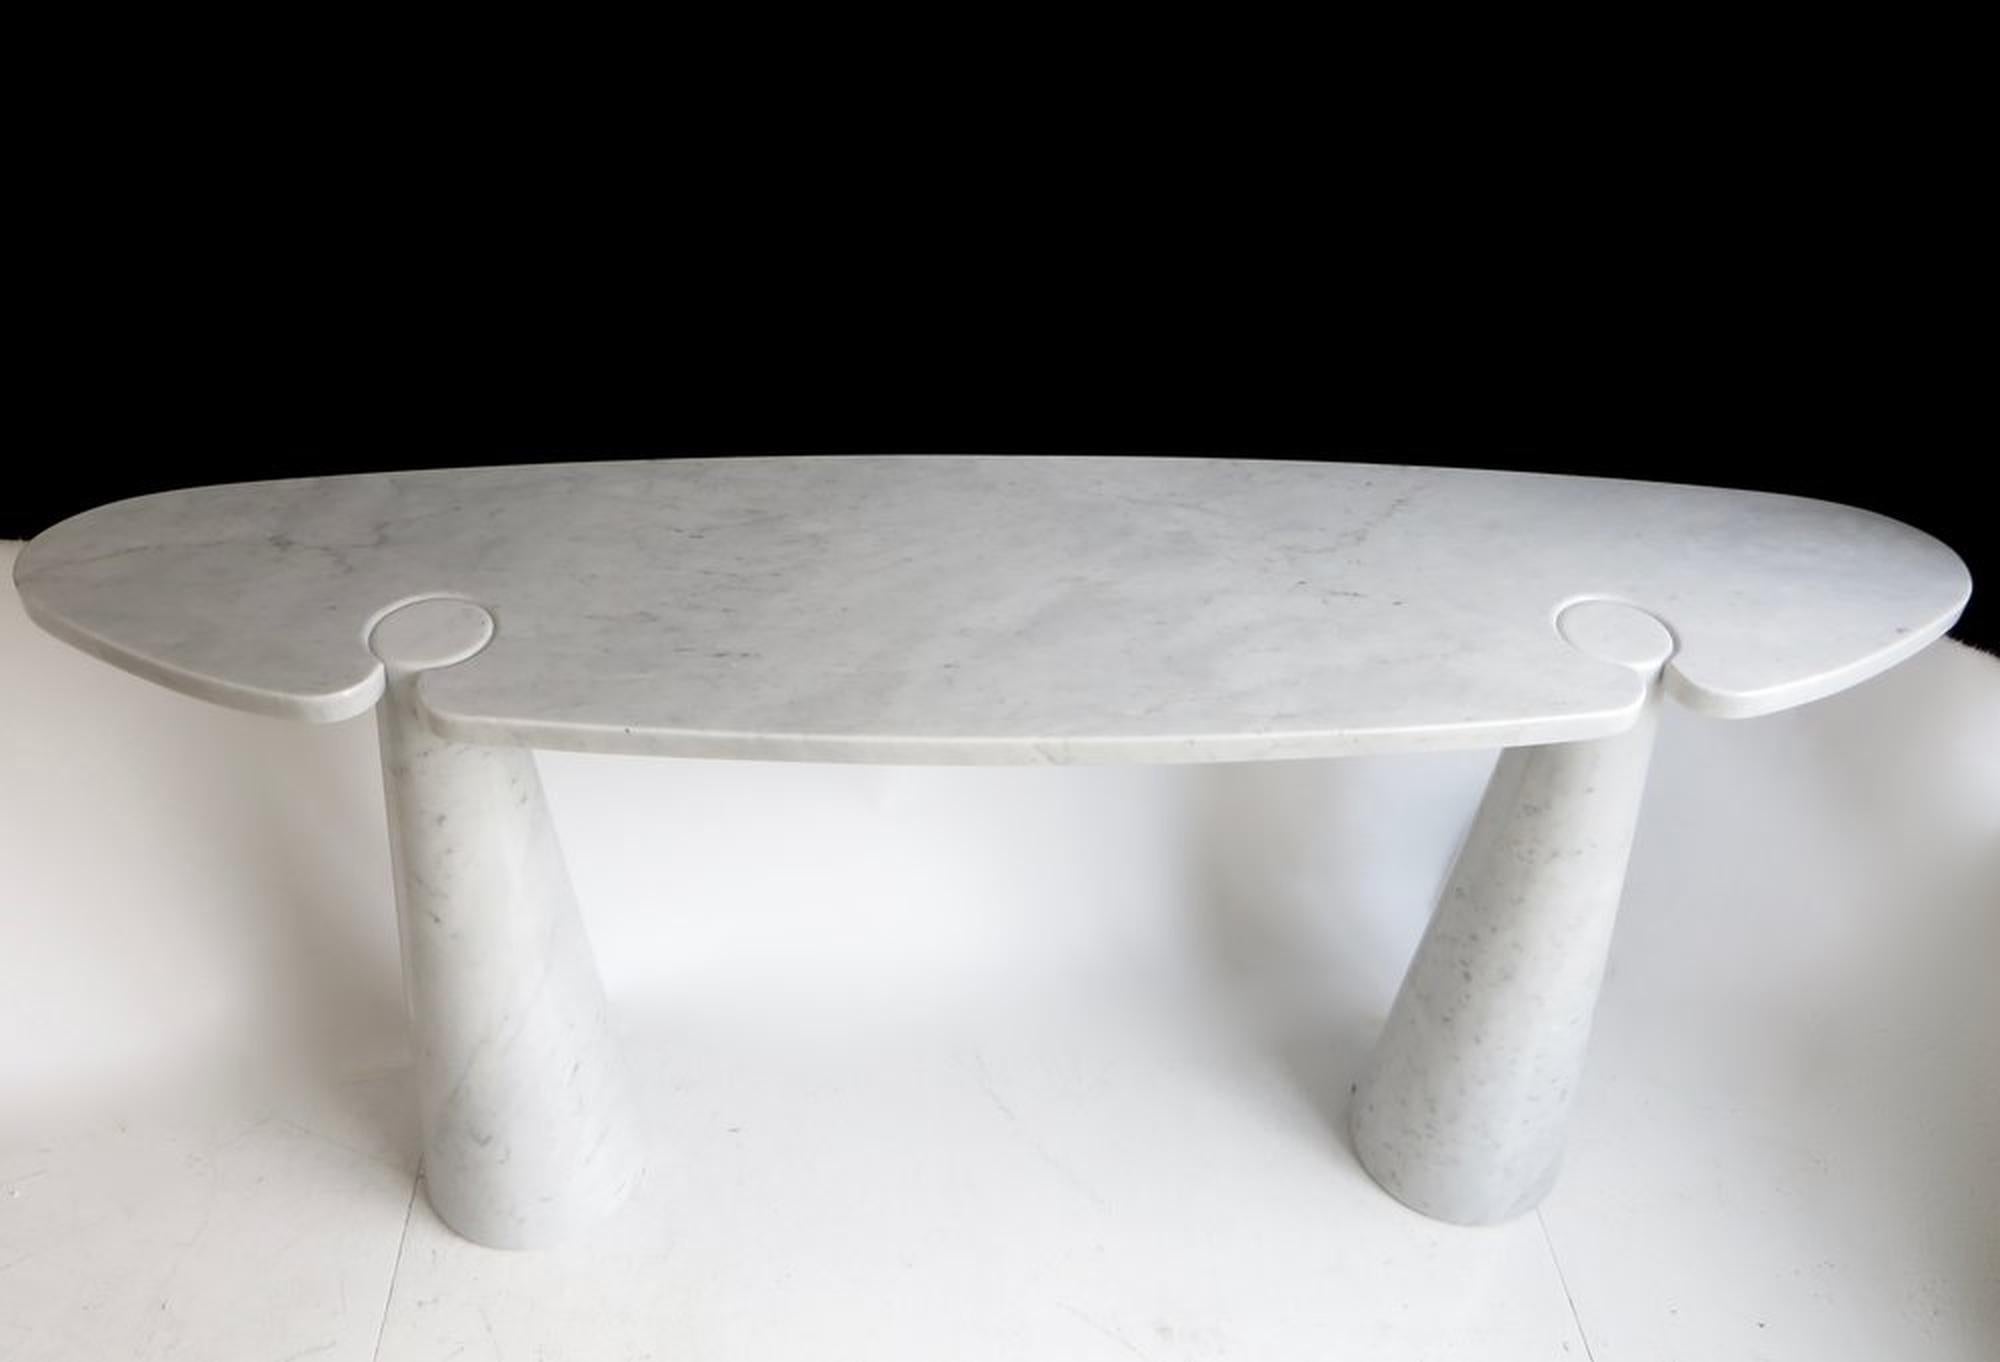 Eros console by Angelo Mangiarotti for Skipper Eros, circa 1971 in white marble Carrara marble. 
Designed by Angelo Mangiarotti for Skipper from the 'Eros' series, Carrara marble console with top fitted on two conical bases, Italy, 1971. Given